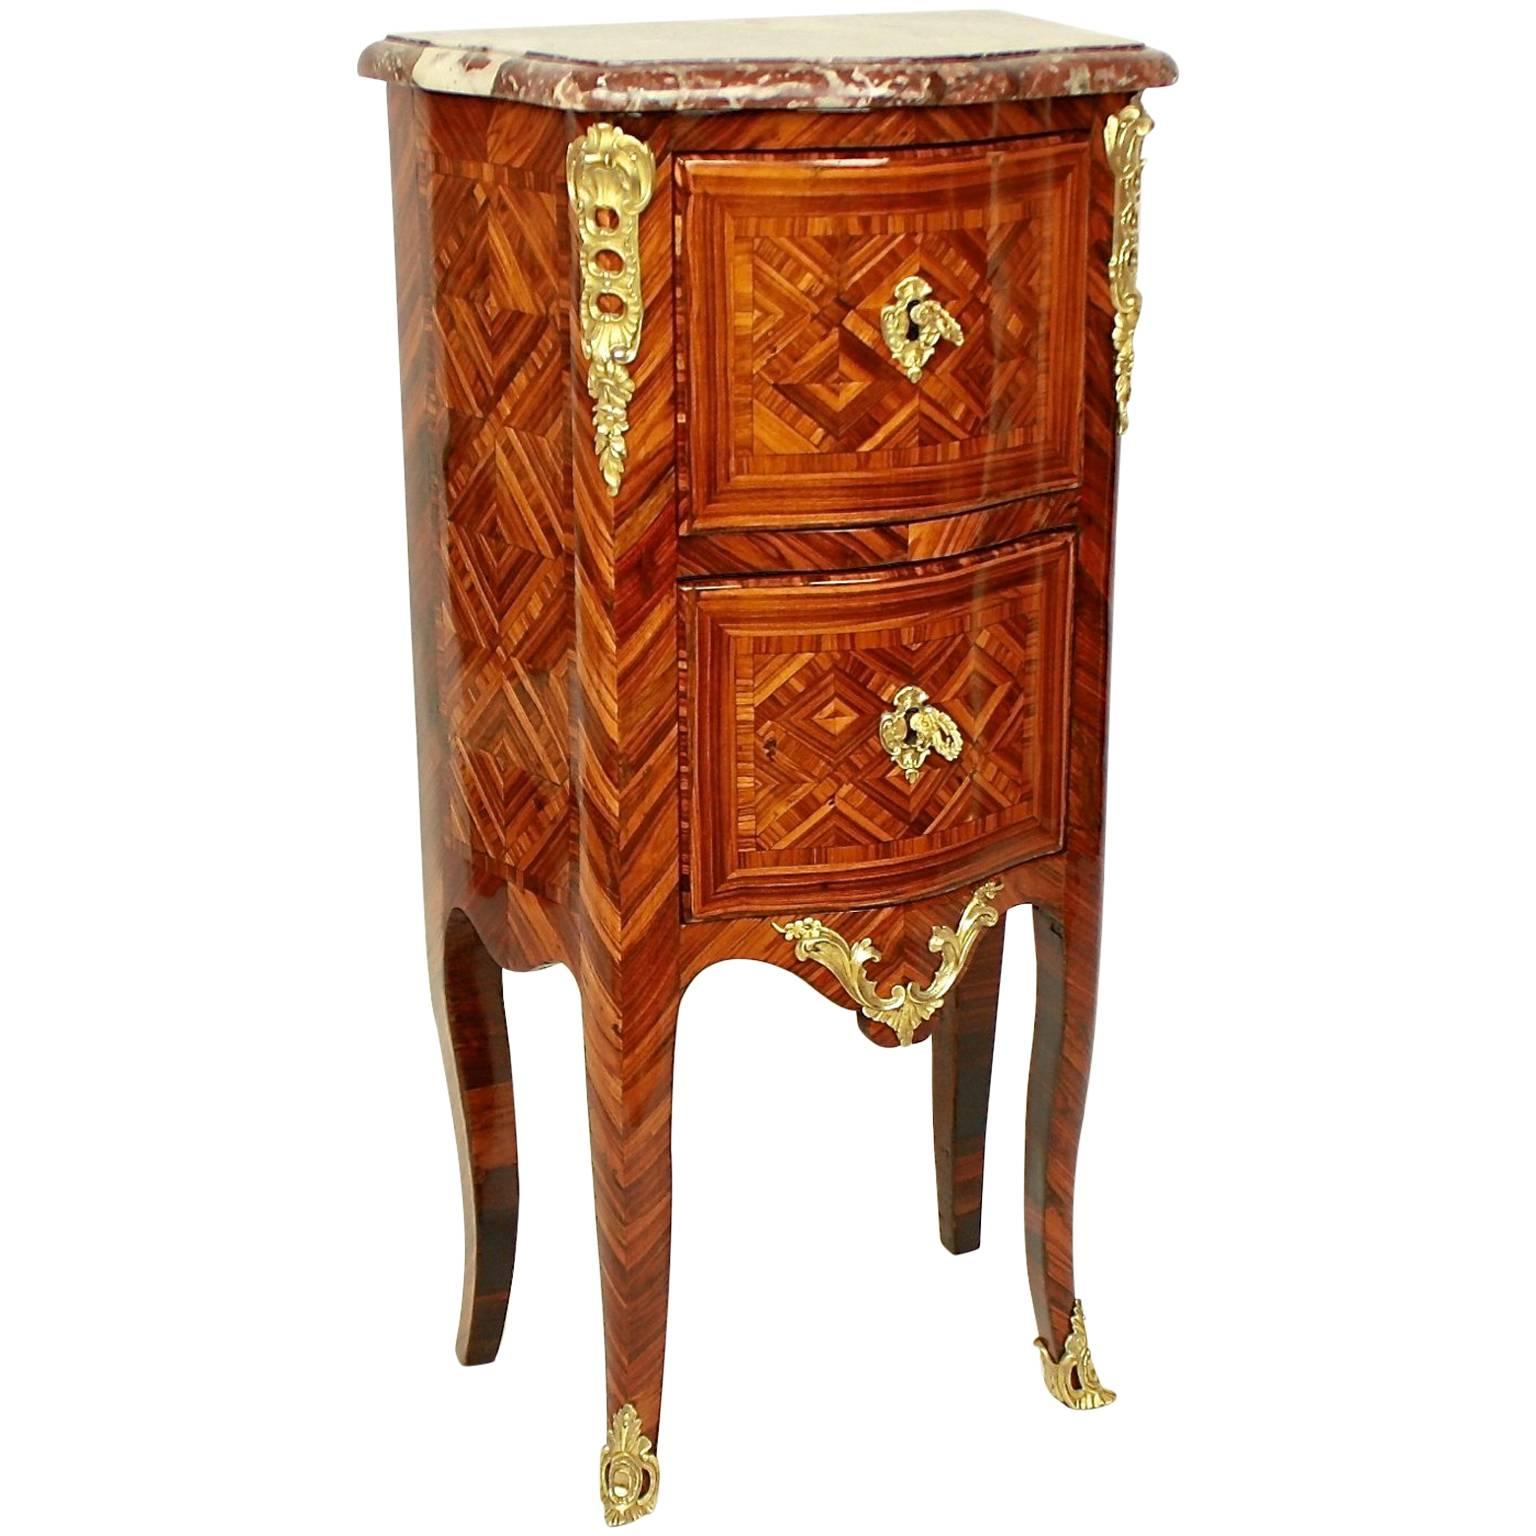 Small Tulipwood and Parquetry Commode, Late Regence, in the Manner of M. Criaerd